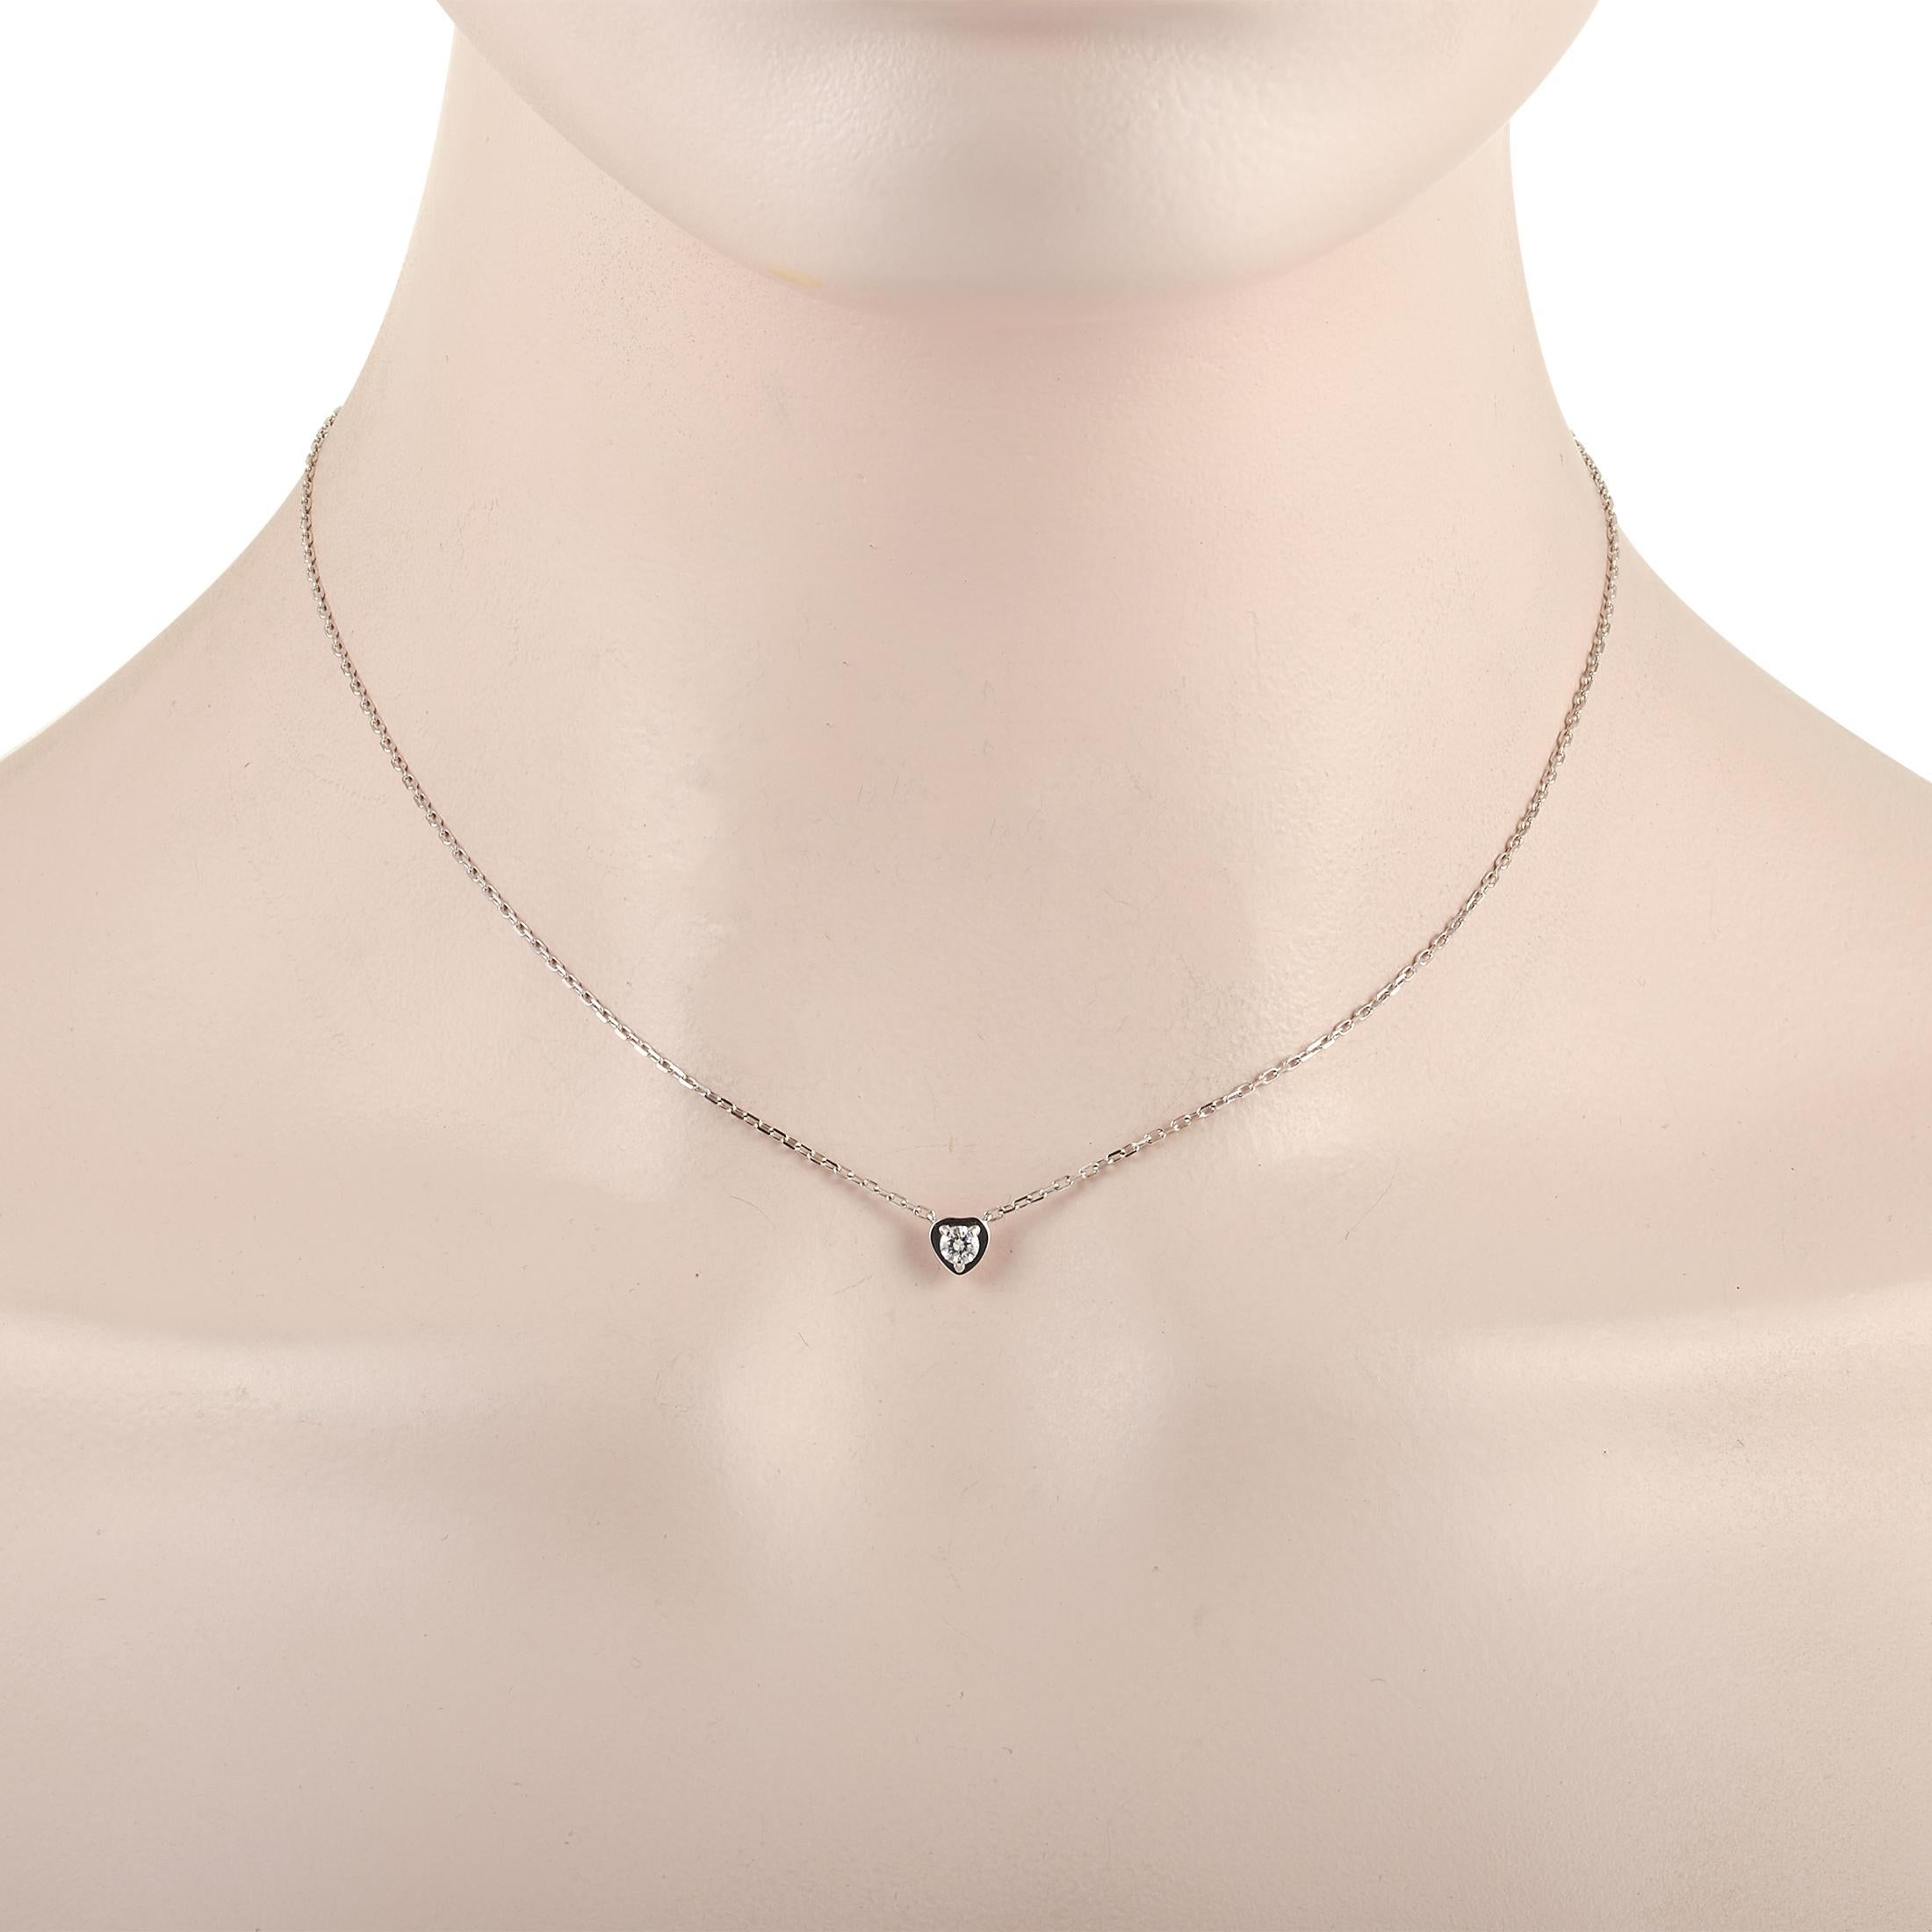 This classic Cartier 18K White Gold 0.20 ct Diamond Leger de heart Necklace is made with an 18K white gold chain which highlighting a white gold heart pendant set with a single round-cut 0.20 carat diamond. The dainty chain measures 1.5 inches in